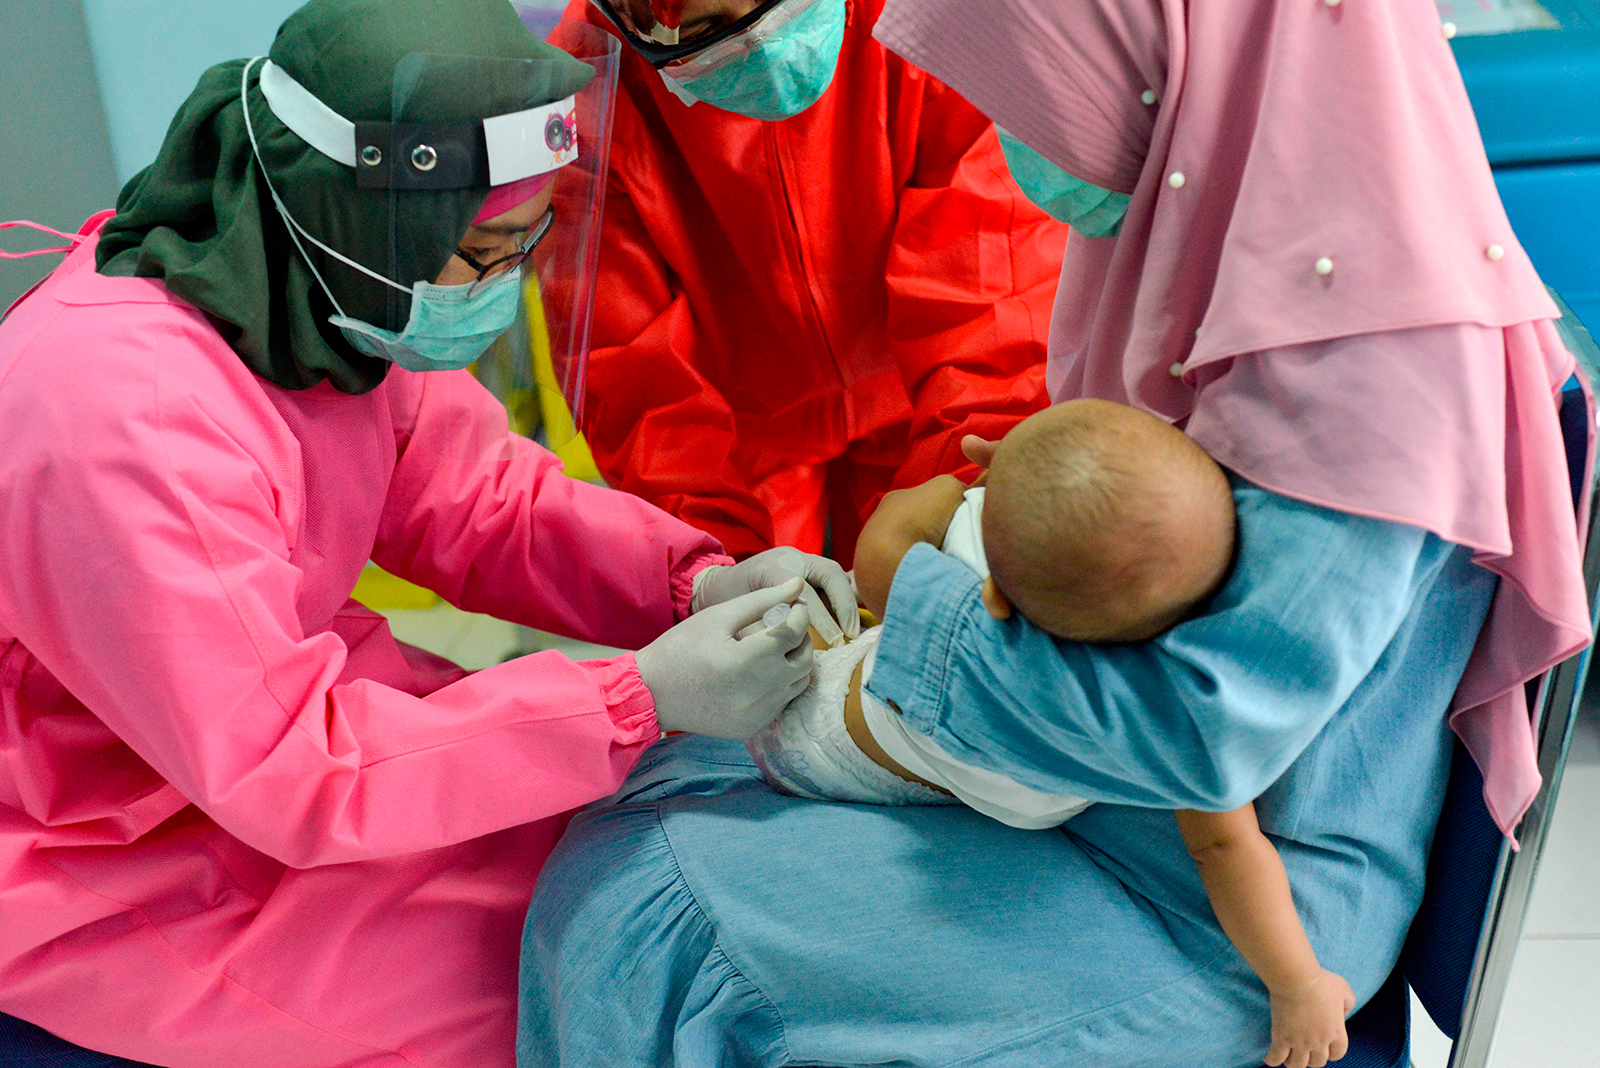 Indonesian medical staff wearing protective gear administer vaccines for rubella and polio on a baby at a community health centre in Banda Aceh on Monday, May 18.